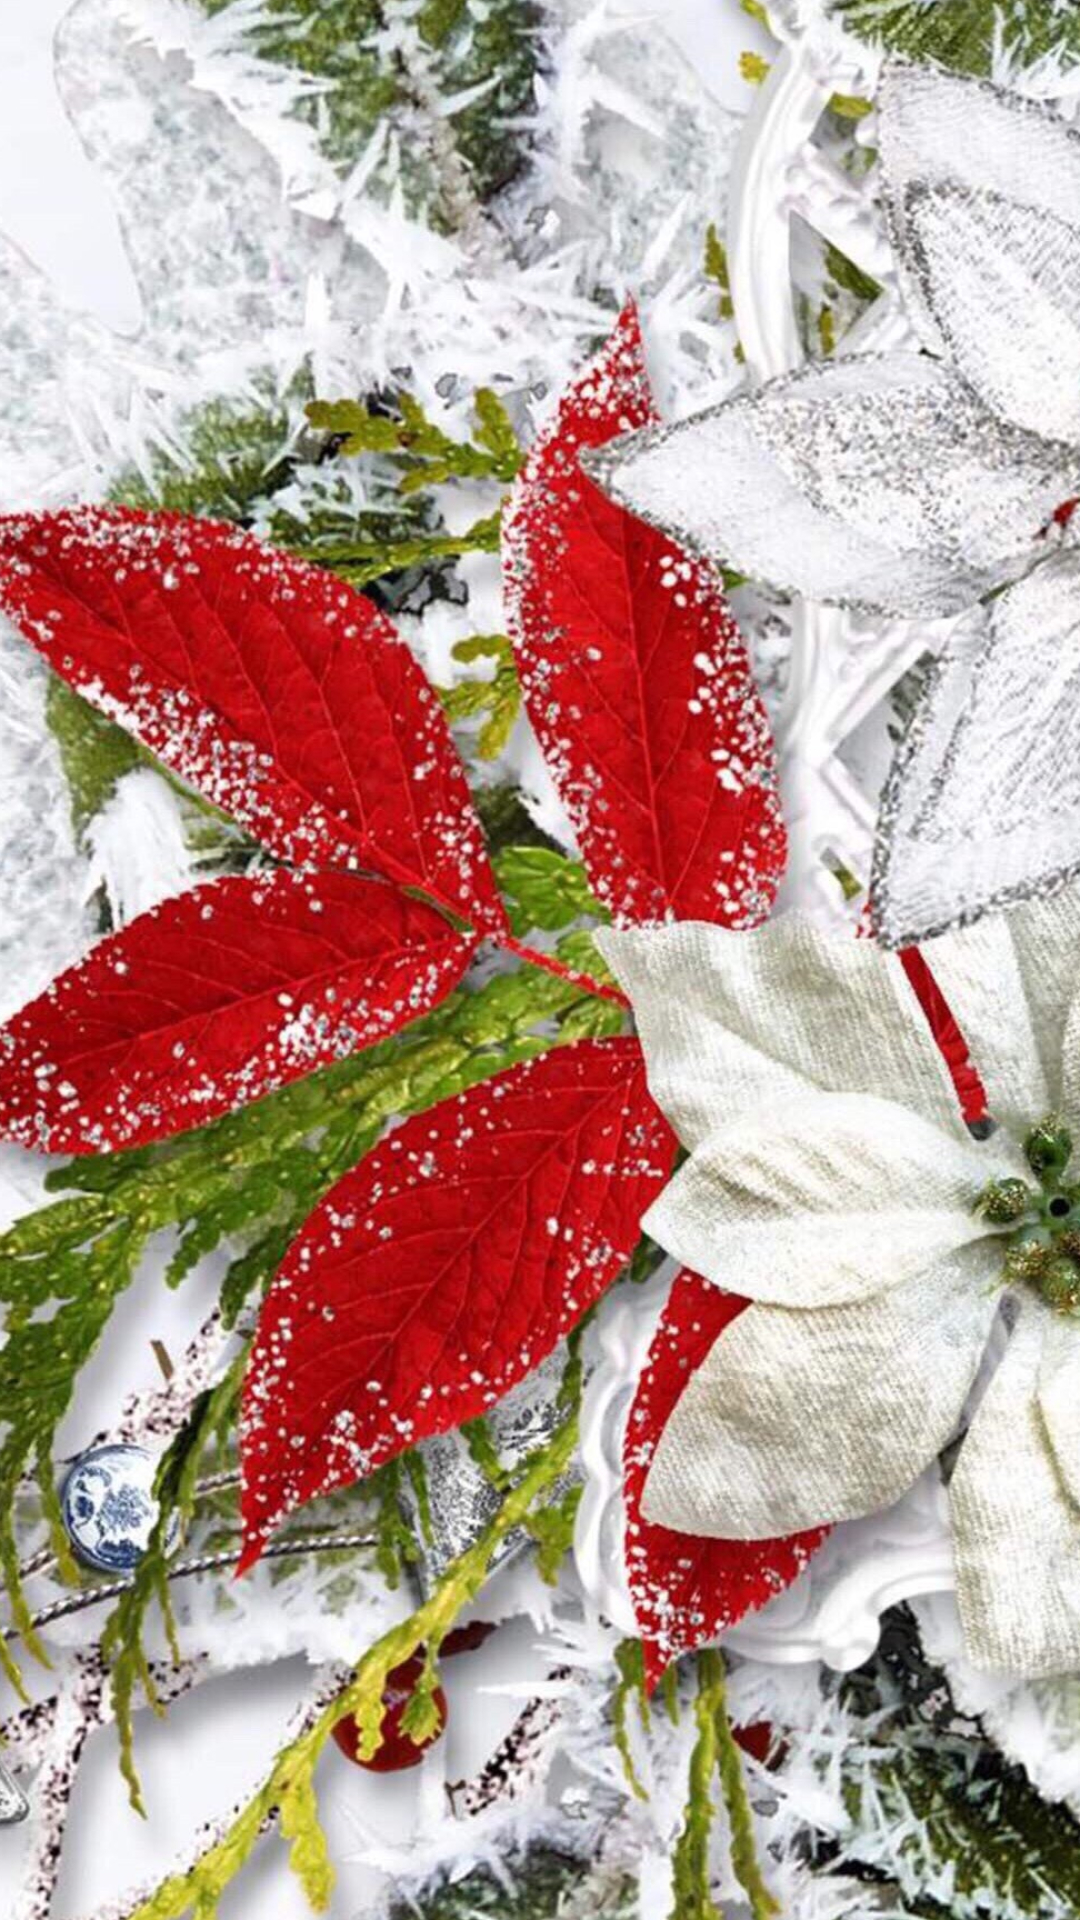 Poinsettia: During the holidays, poinsettias are popular Christmas plants. 1080x1920 Full HD Background.